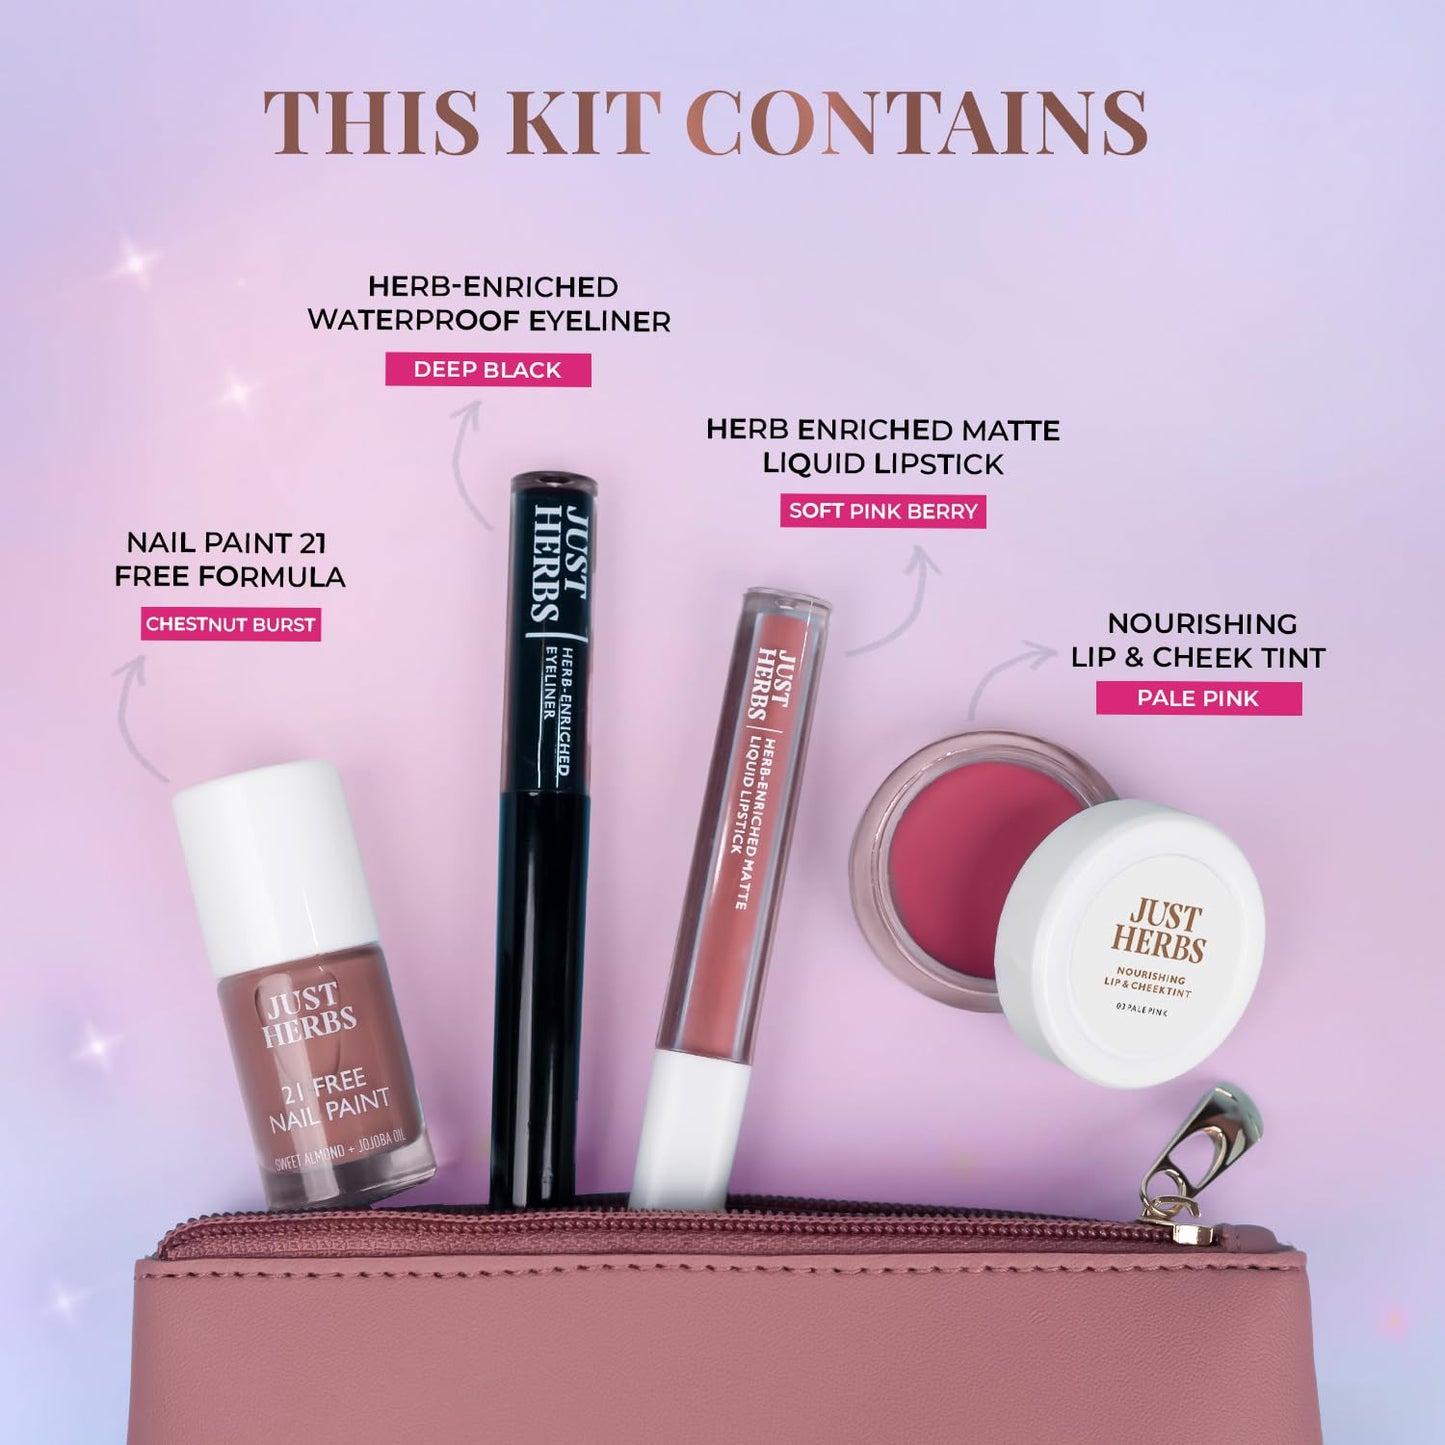 Just Herbs All in 1 Glam Kit Travel Frindly Gifting Pouch for Women (Lip & Cheeck Tint, Liquid Lipstick, Nail Paint, Eyeliner)